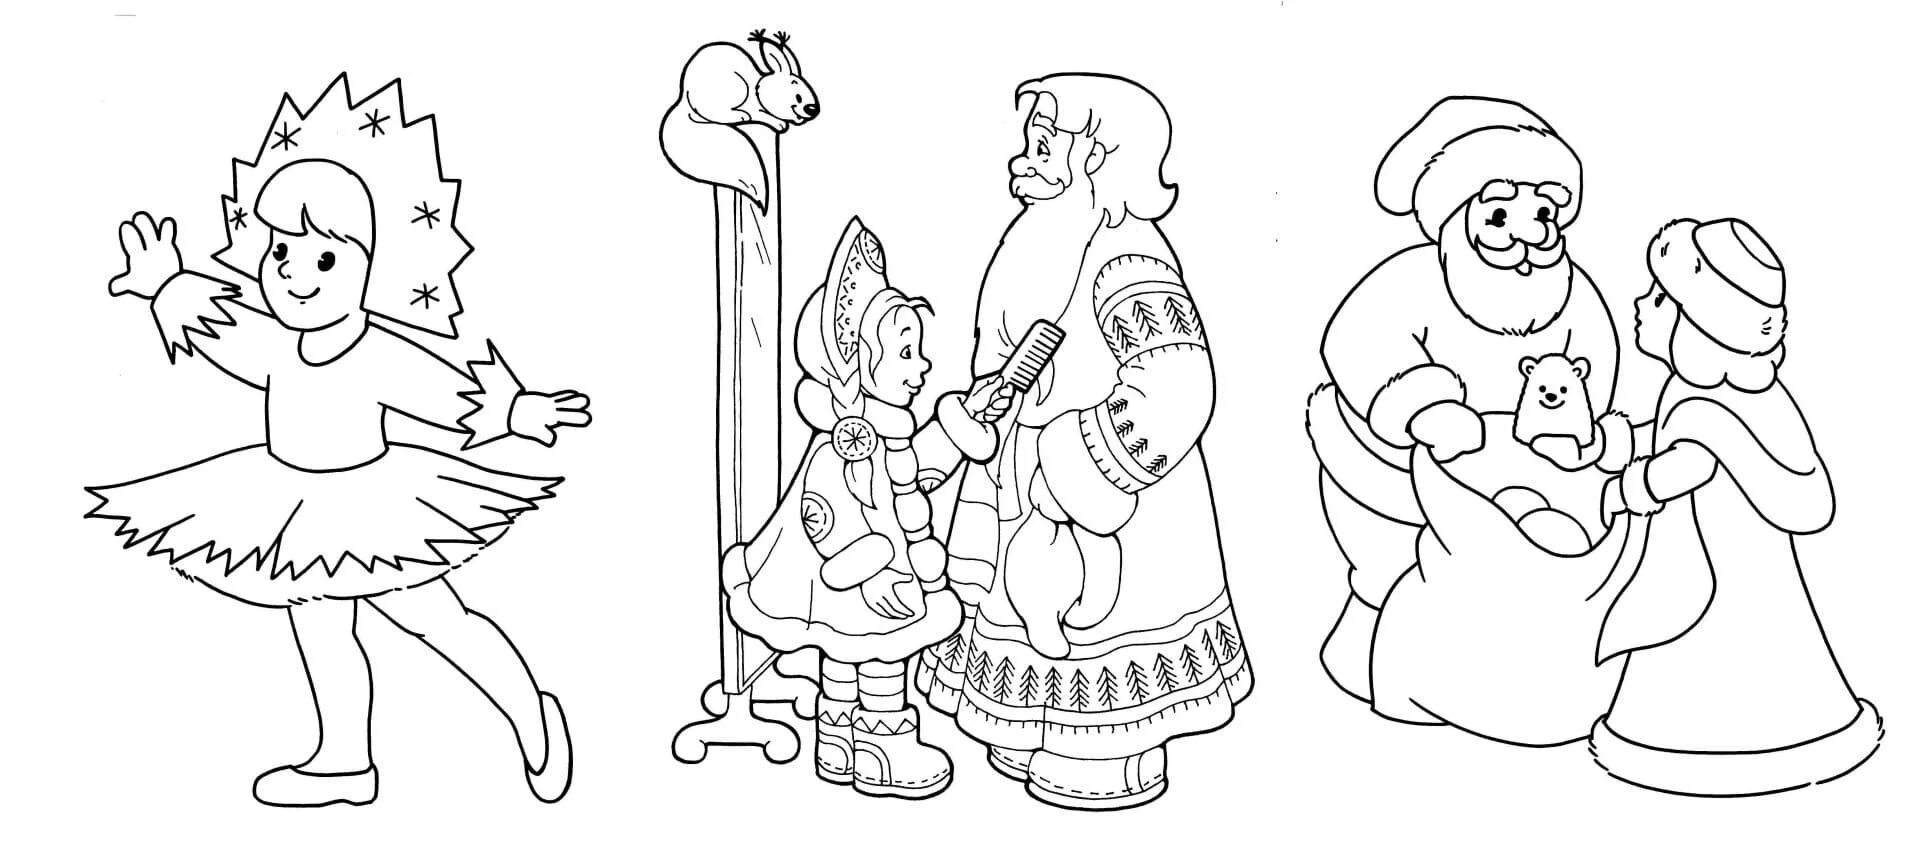 Santa Claus and Snow Maiden drawing #10